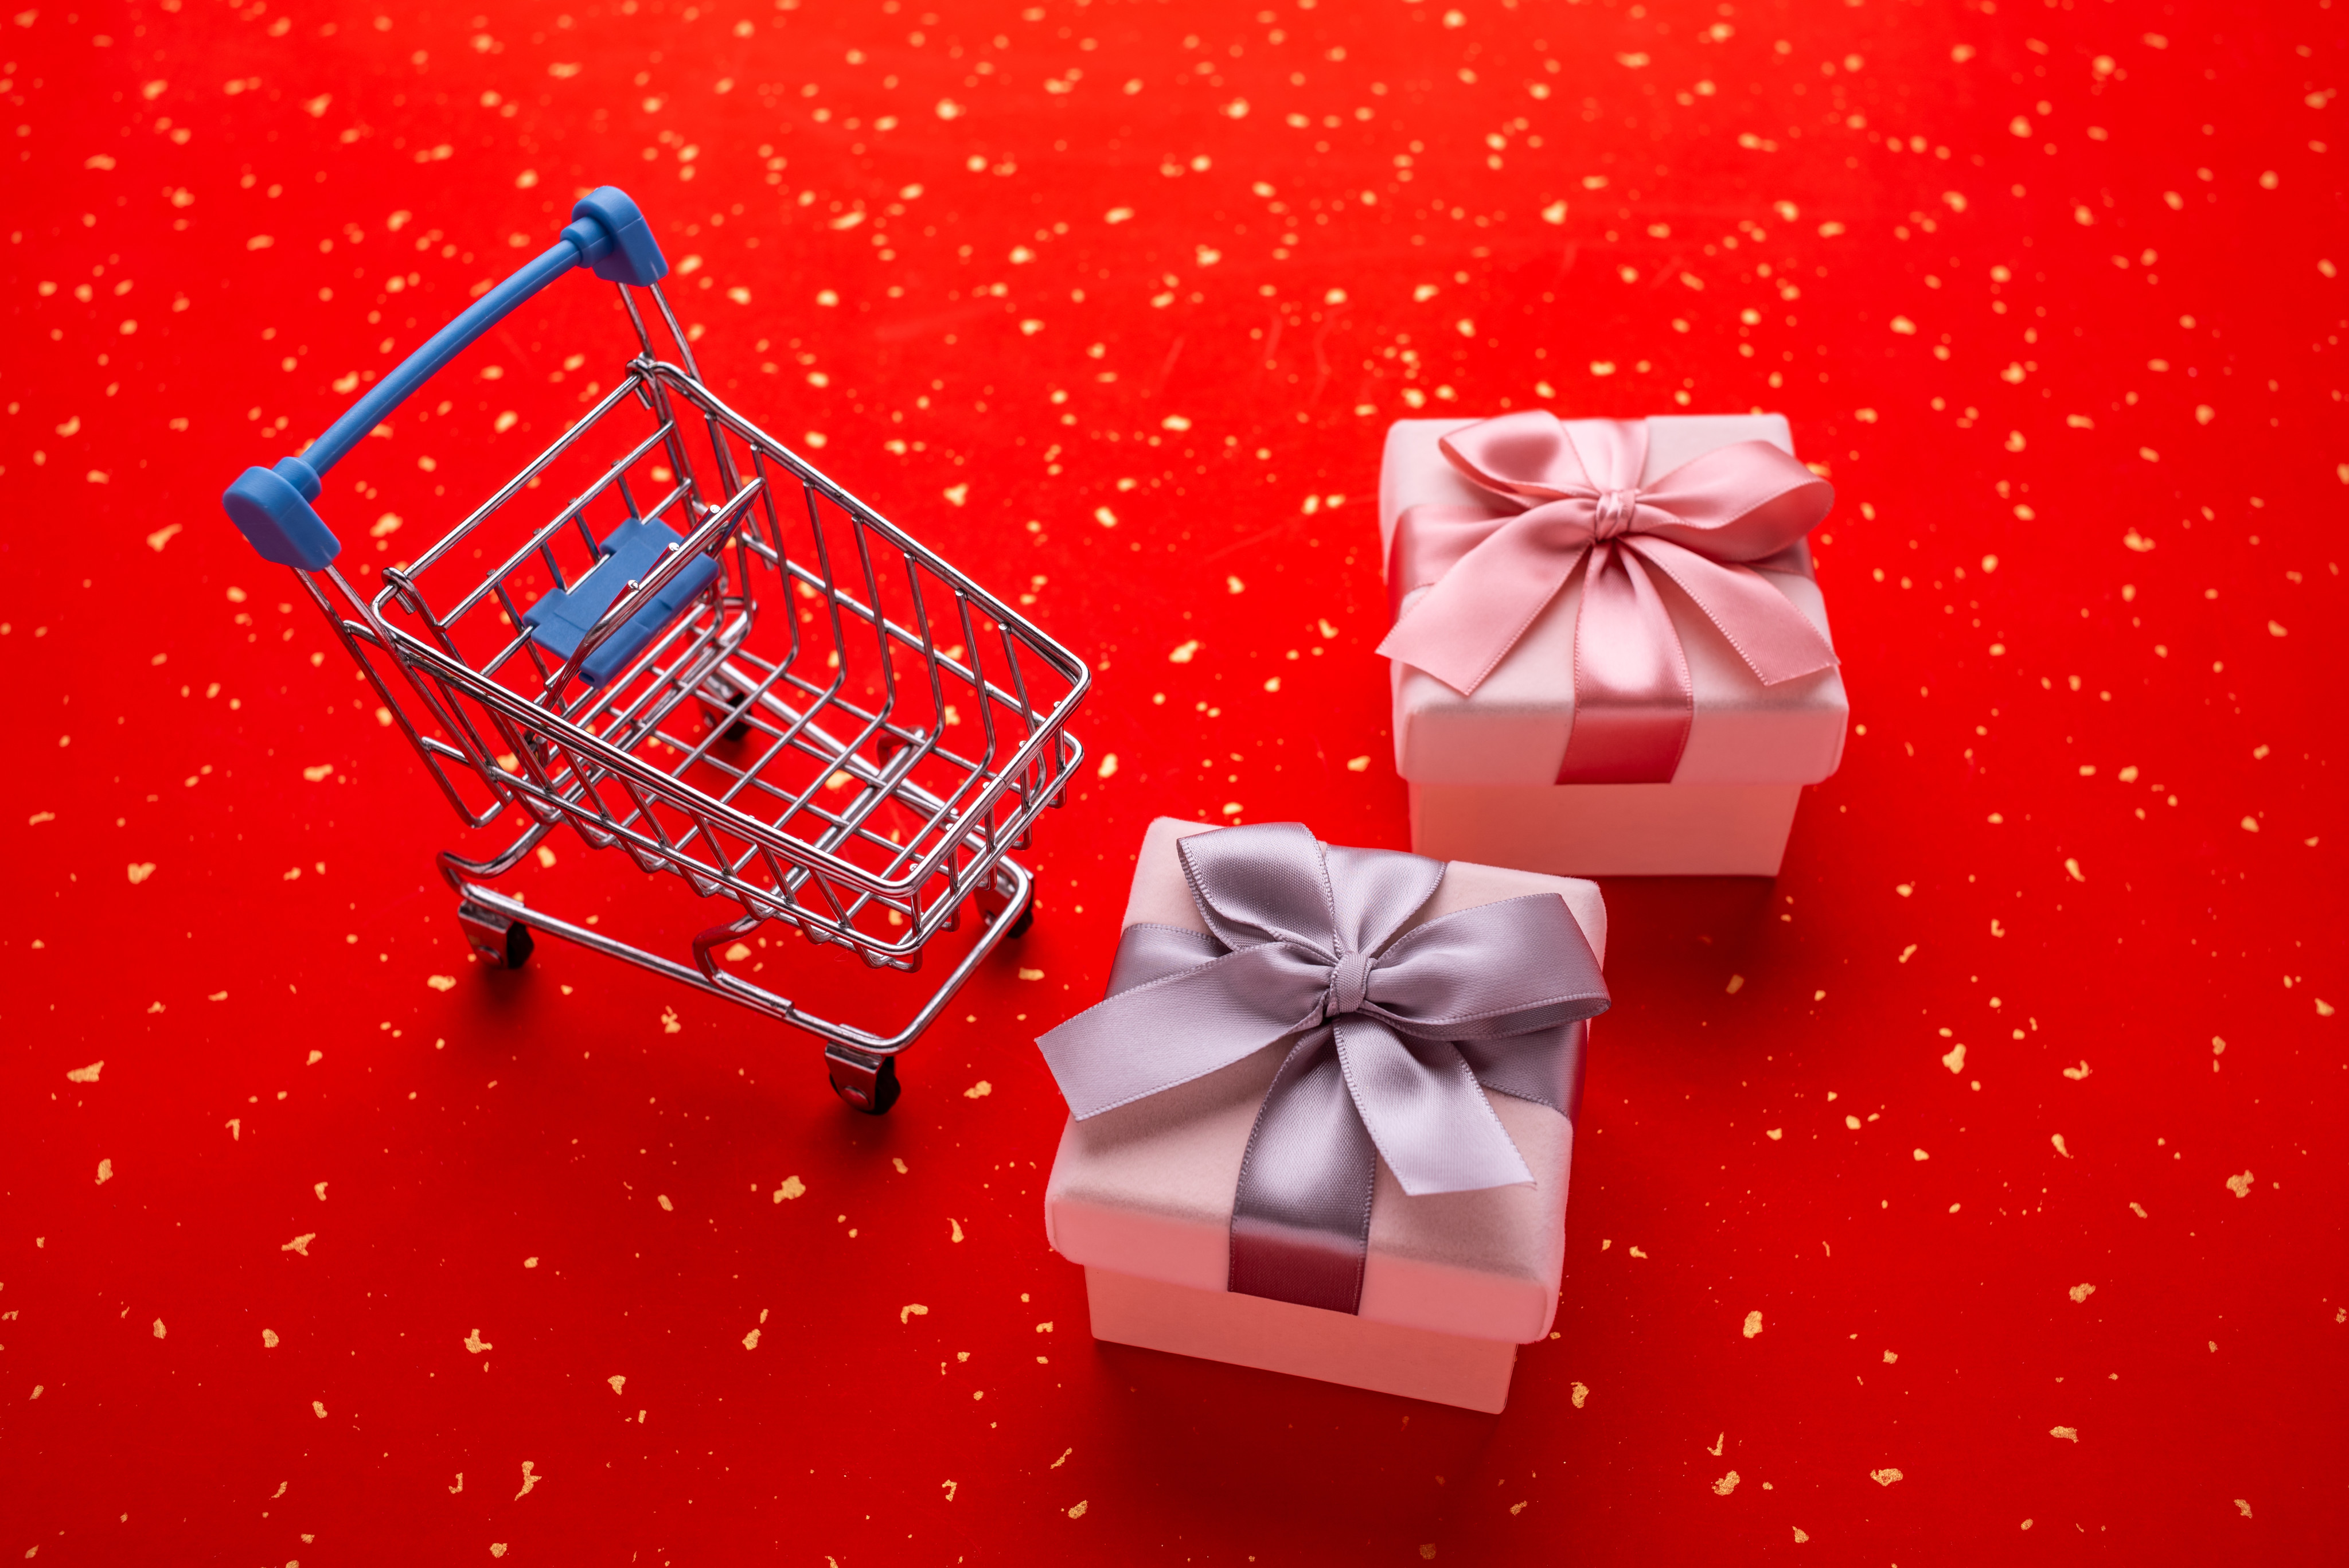 Alibaba Group Holding expects Lunar New Year online retail sales to rise further over the next few days. Photo: Shutterstock